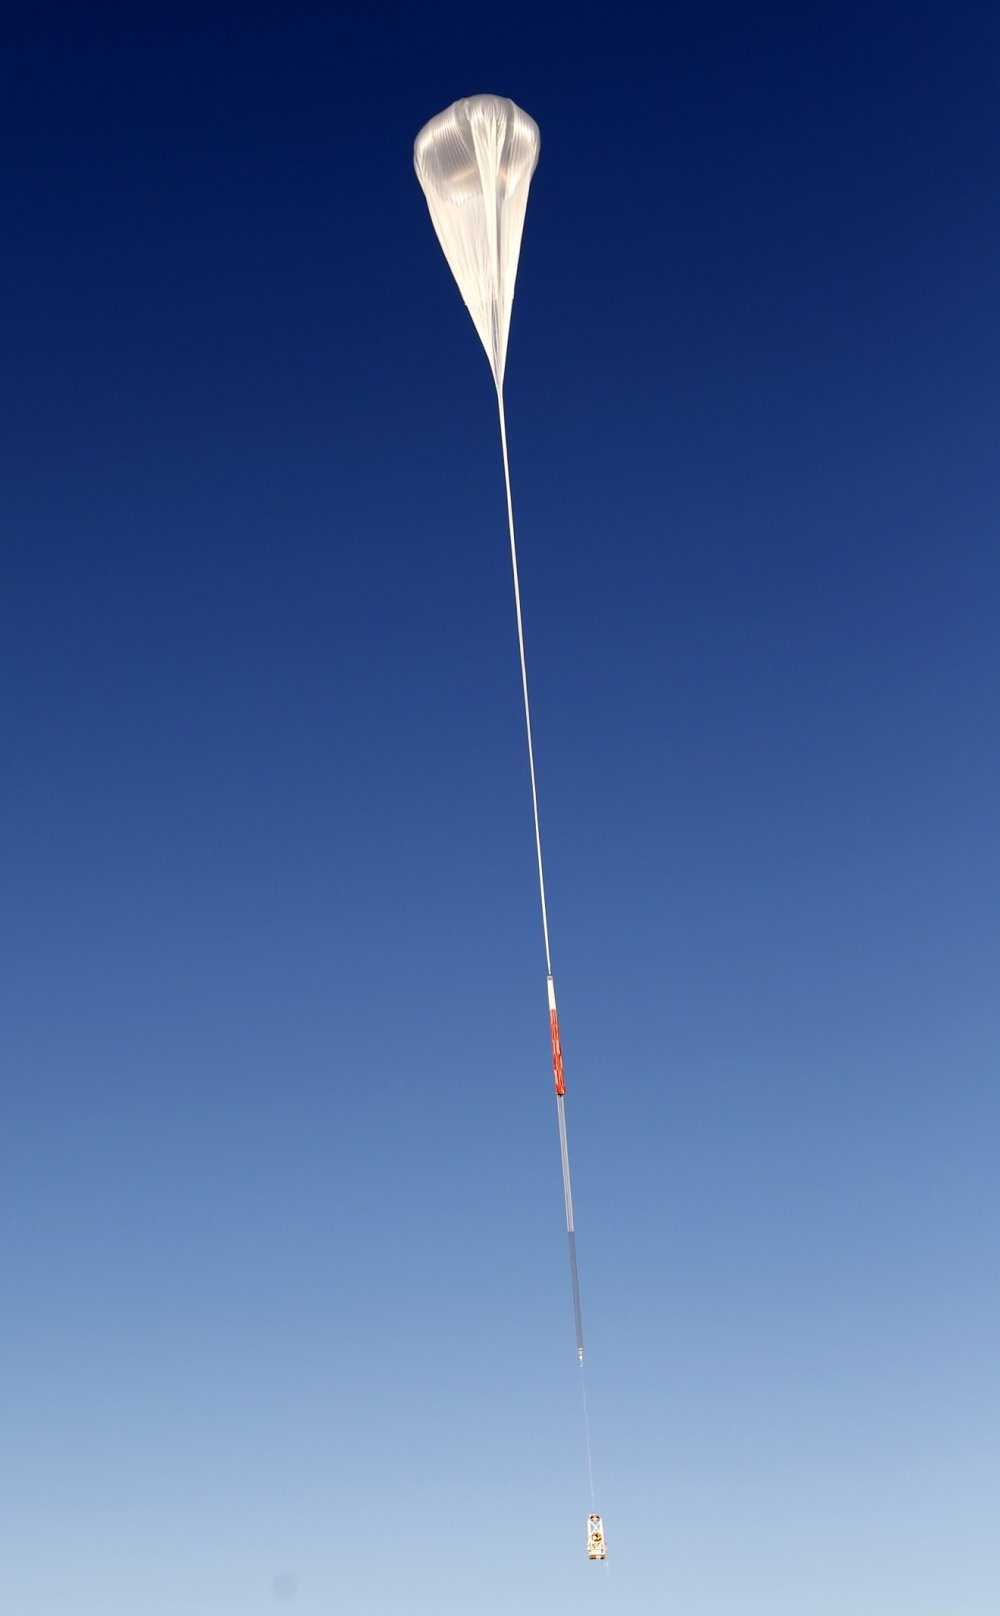 Payload released from the launch vehicle ascending free (picture: NASA/JHUAPL)